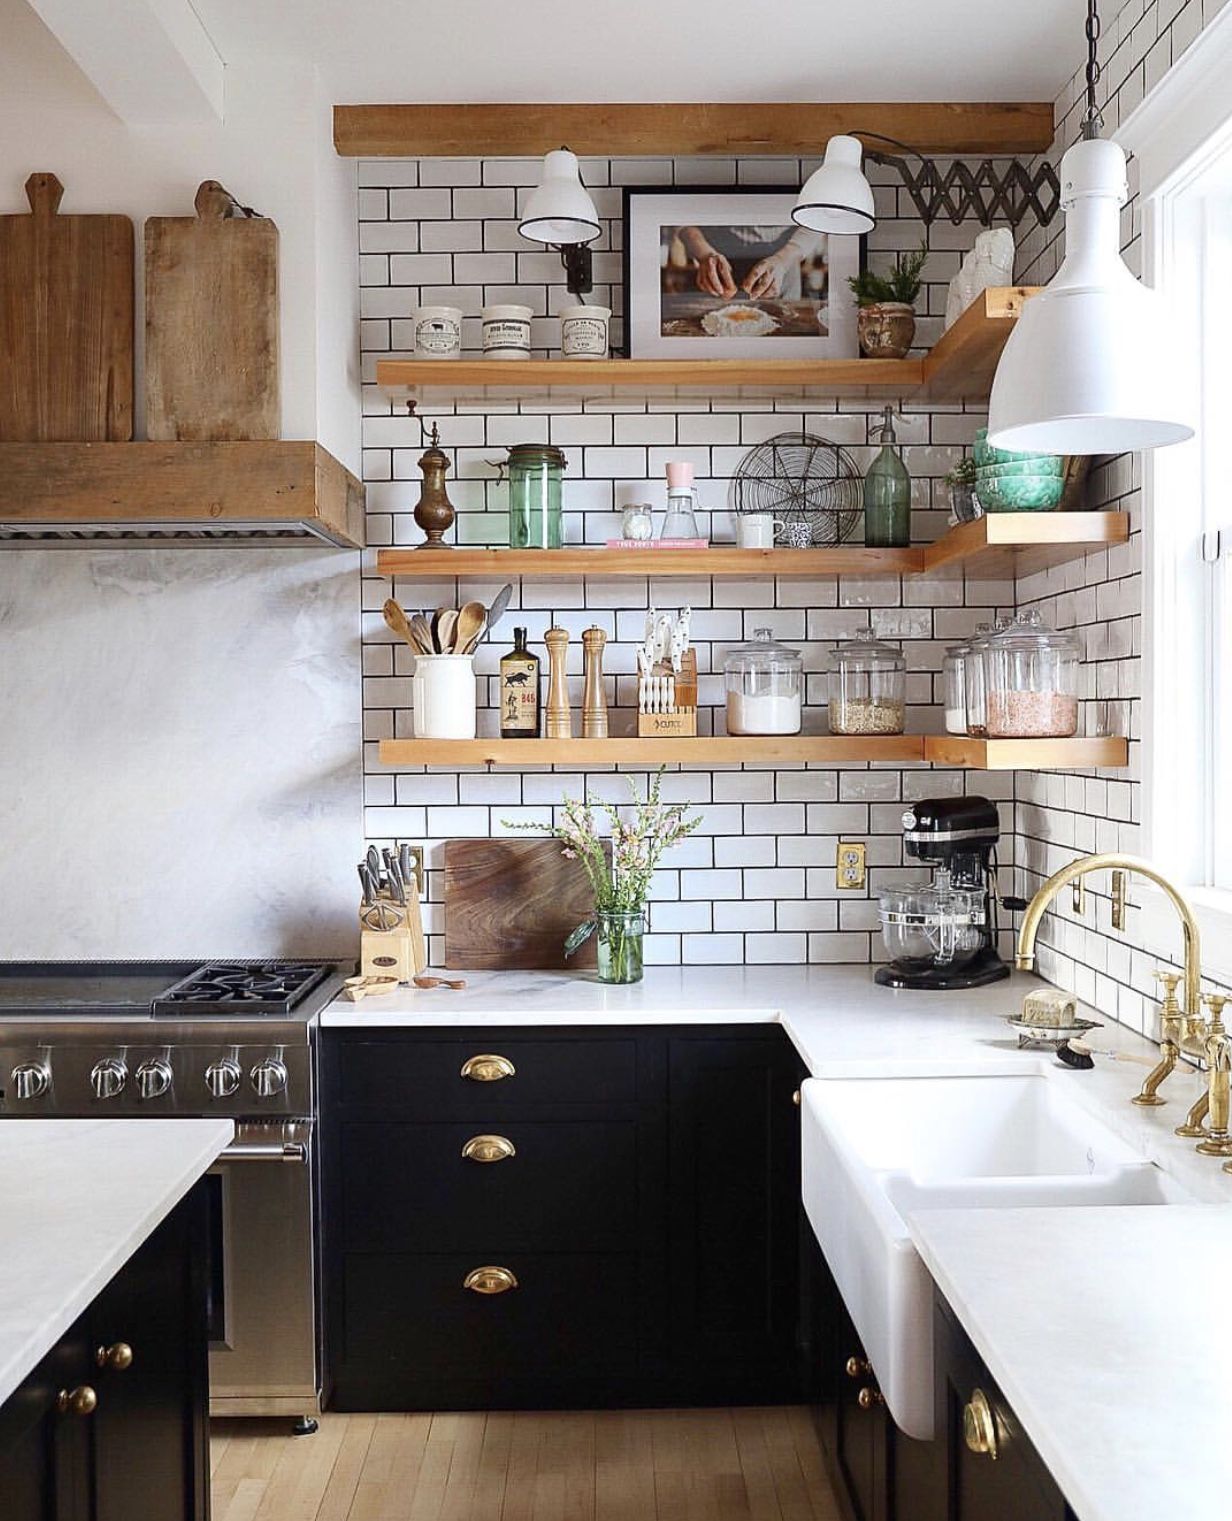 Make Your Kitchen Looks Clean with The White Countertops